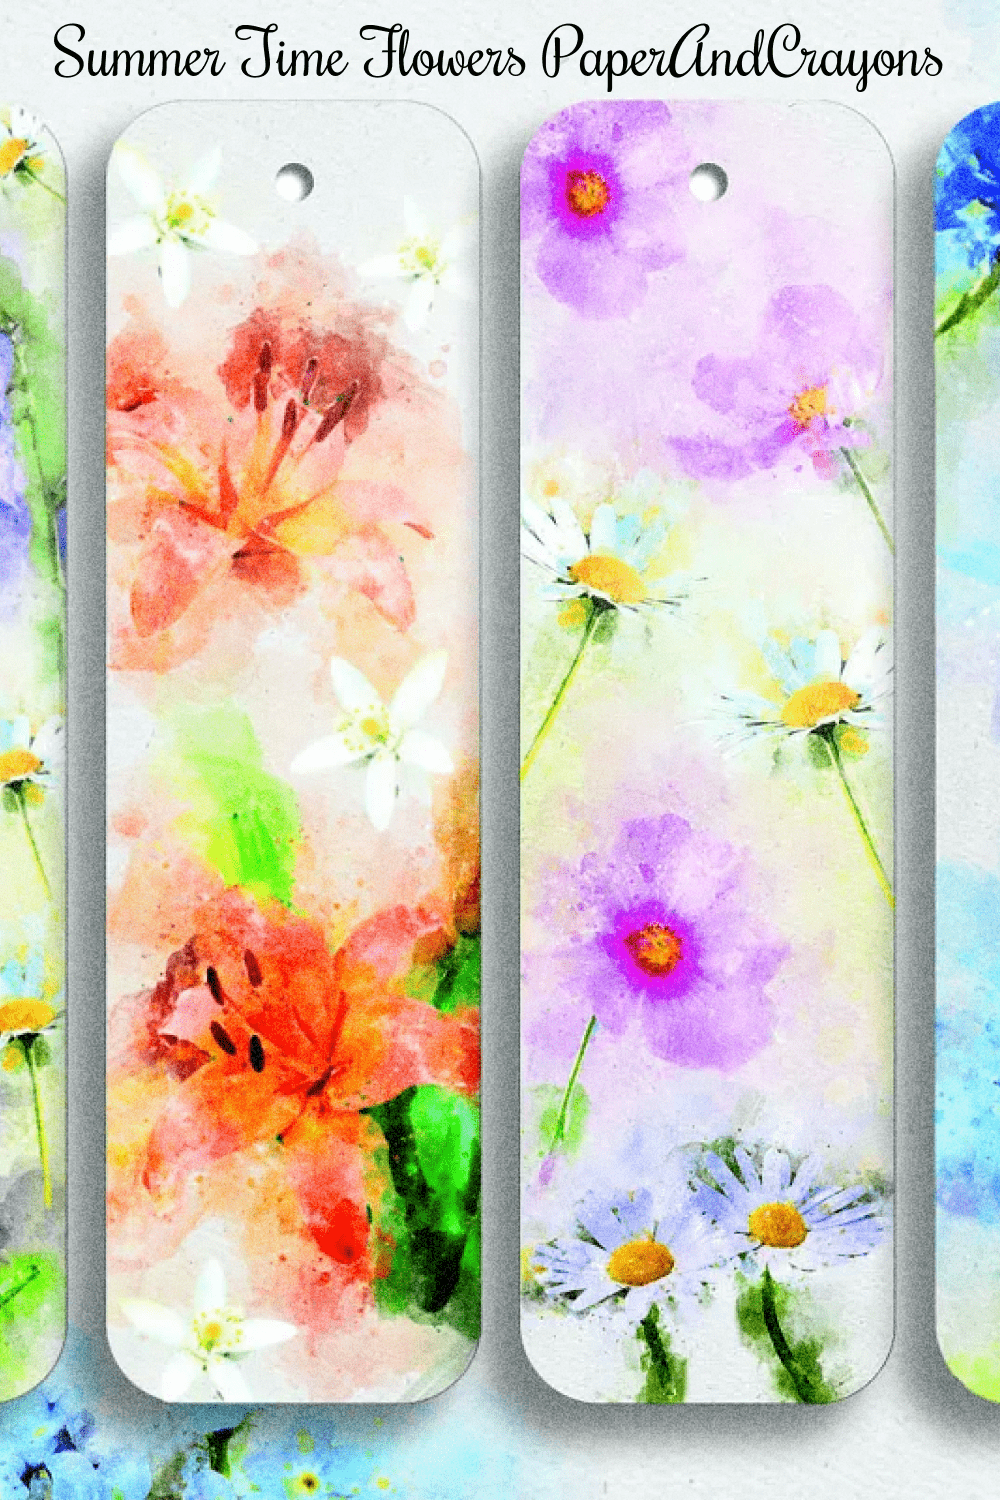 Summer time flowers paperandcrayons - pinterest image preview.